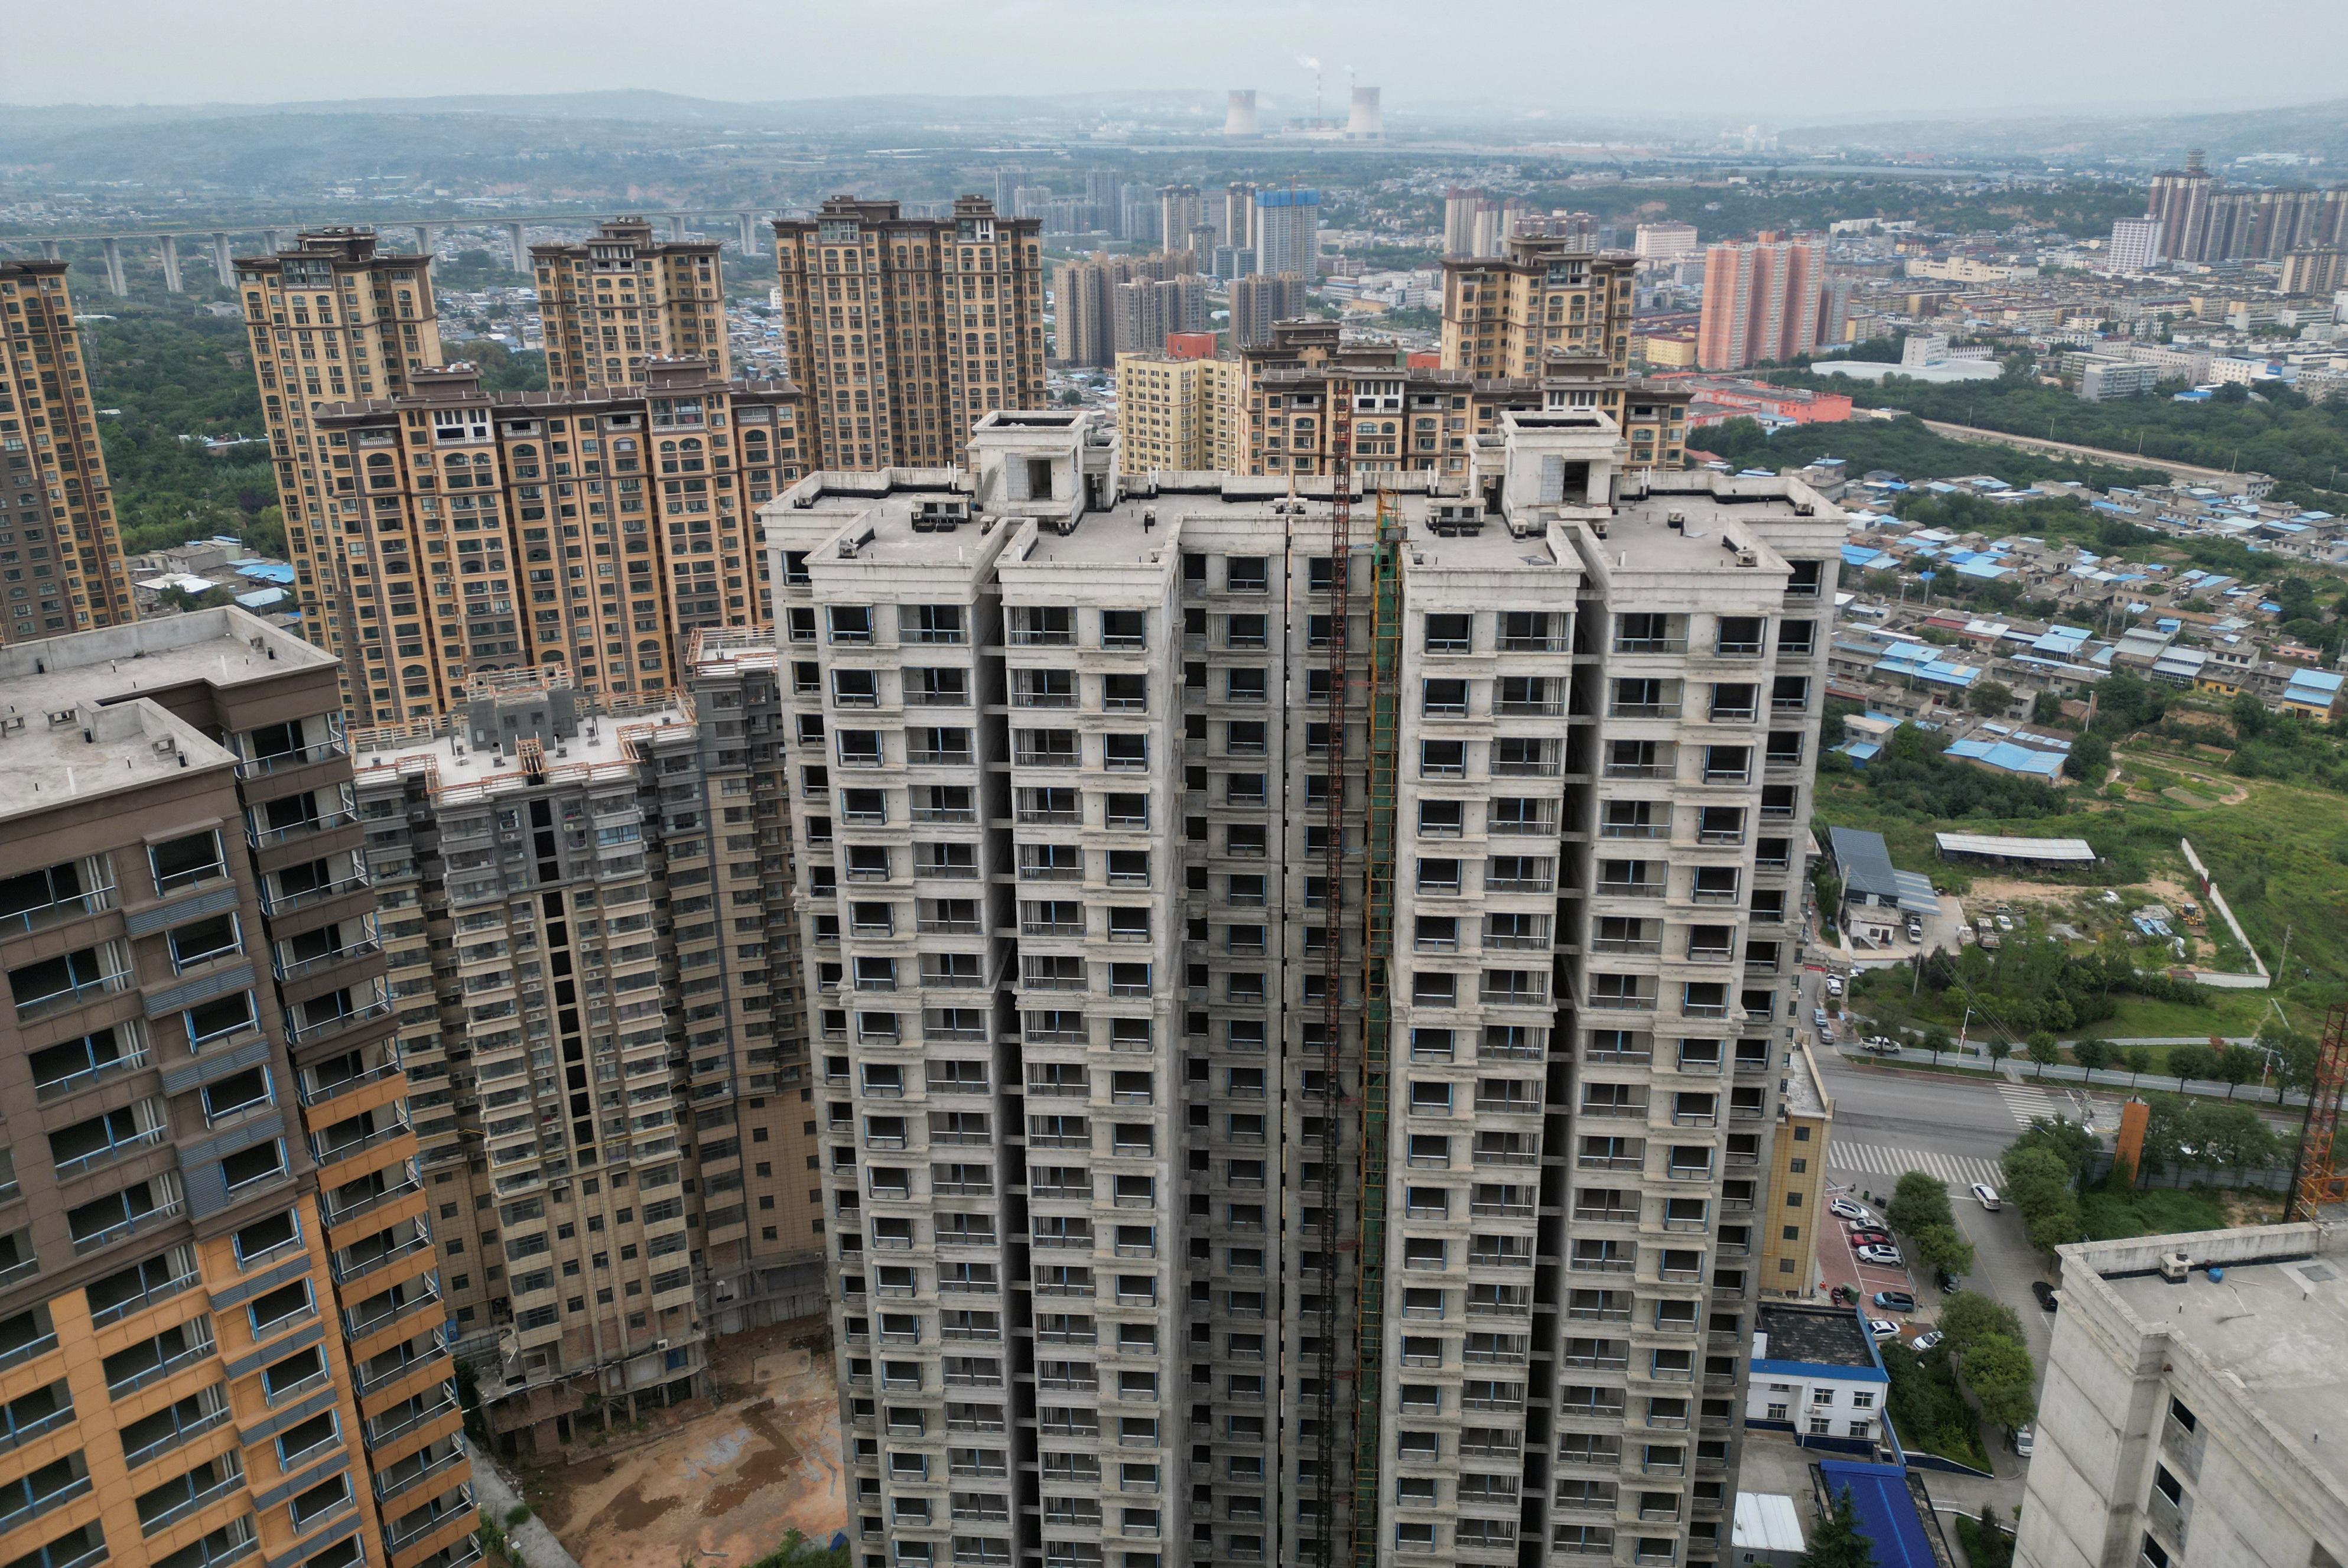 Aerial view shows unfinished residential buildings in Tongchuan